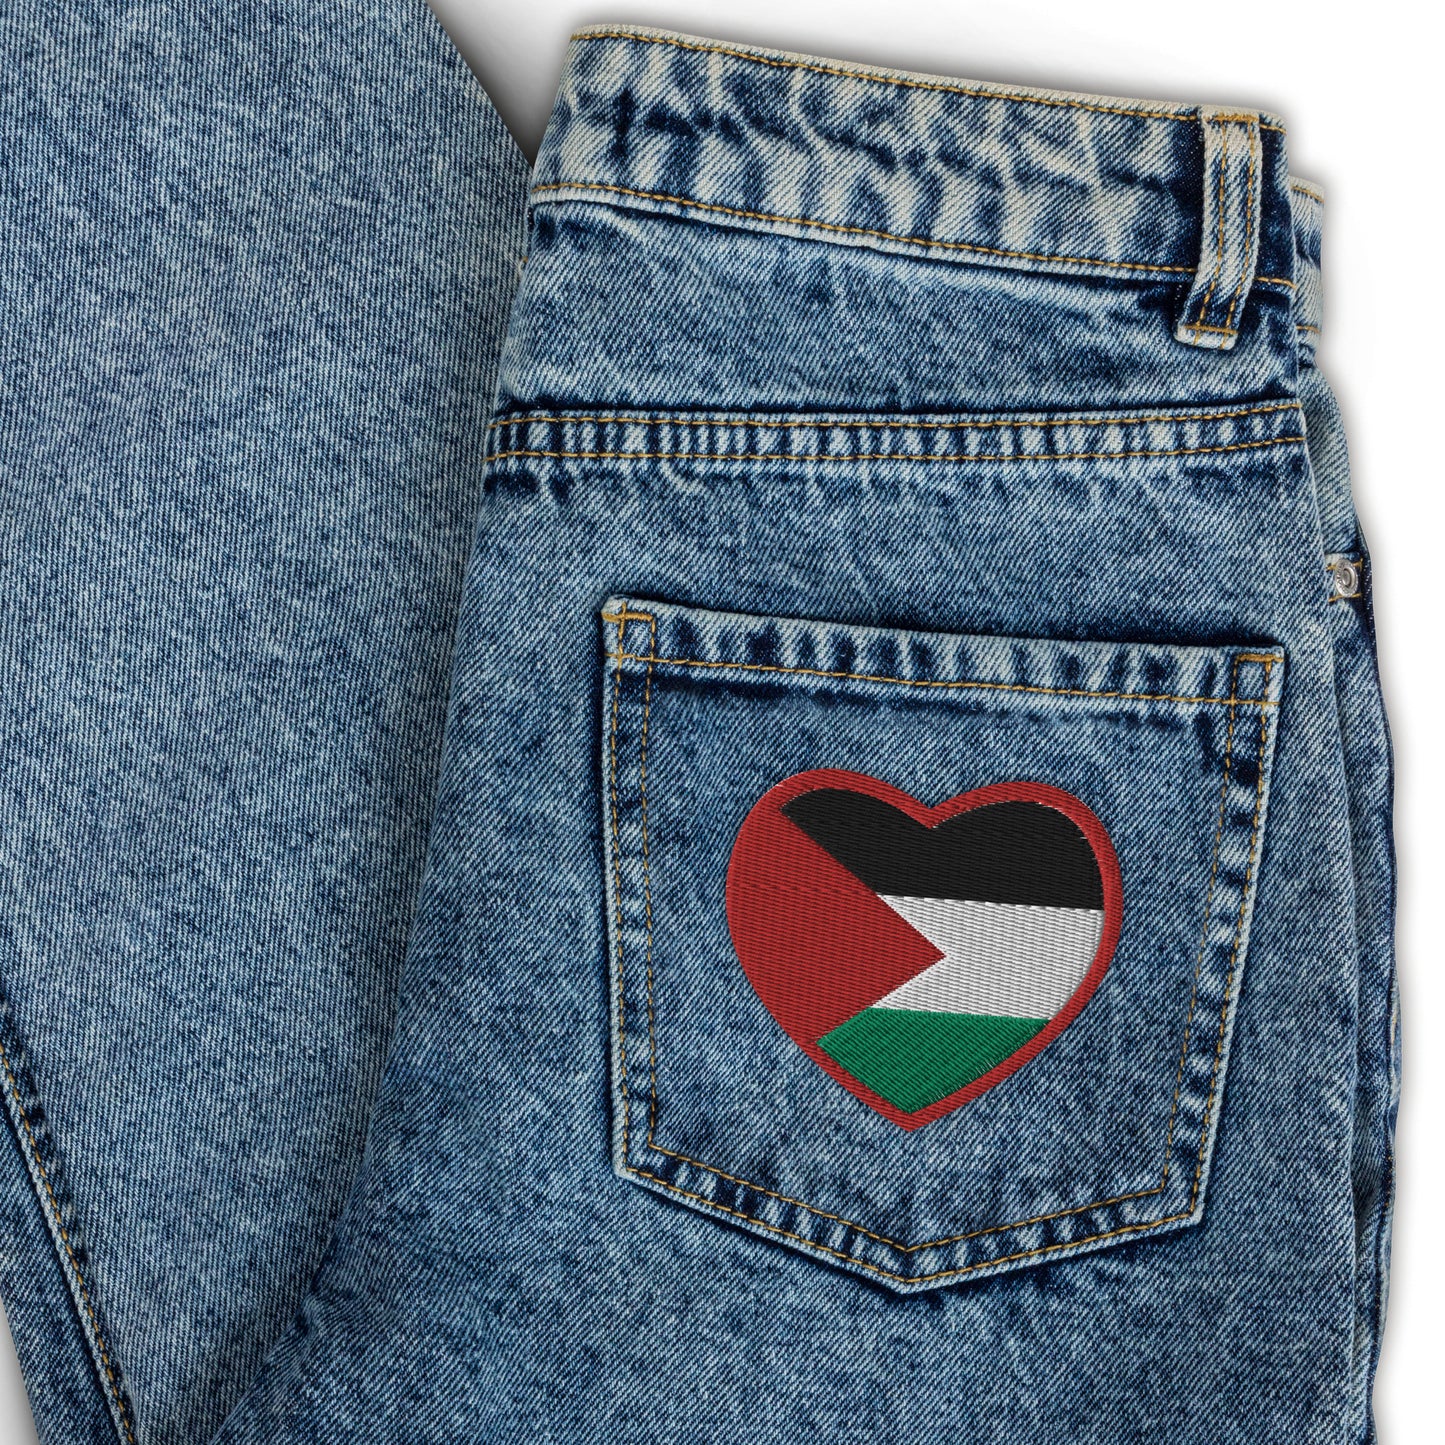 Embroidered Palestine Flag Patch